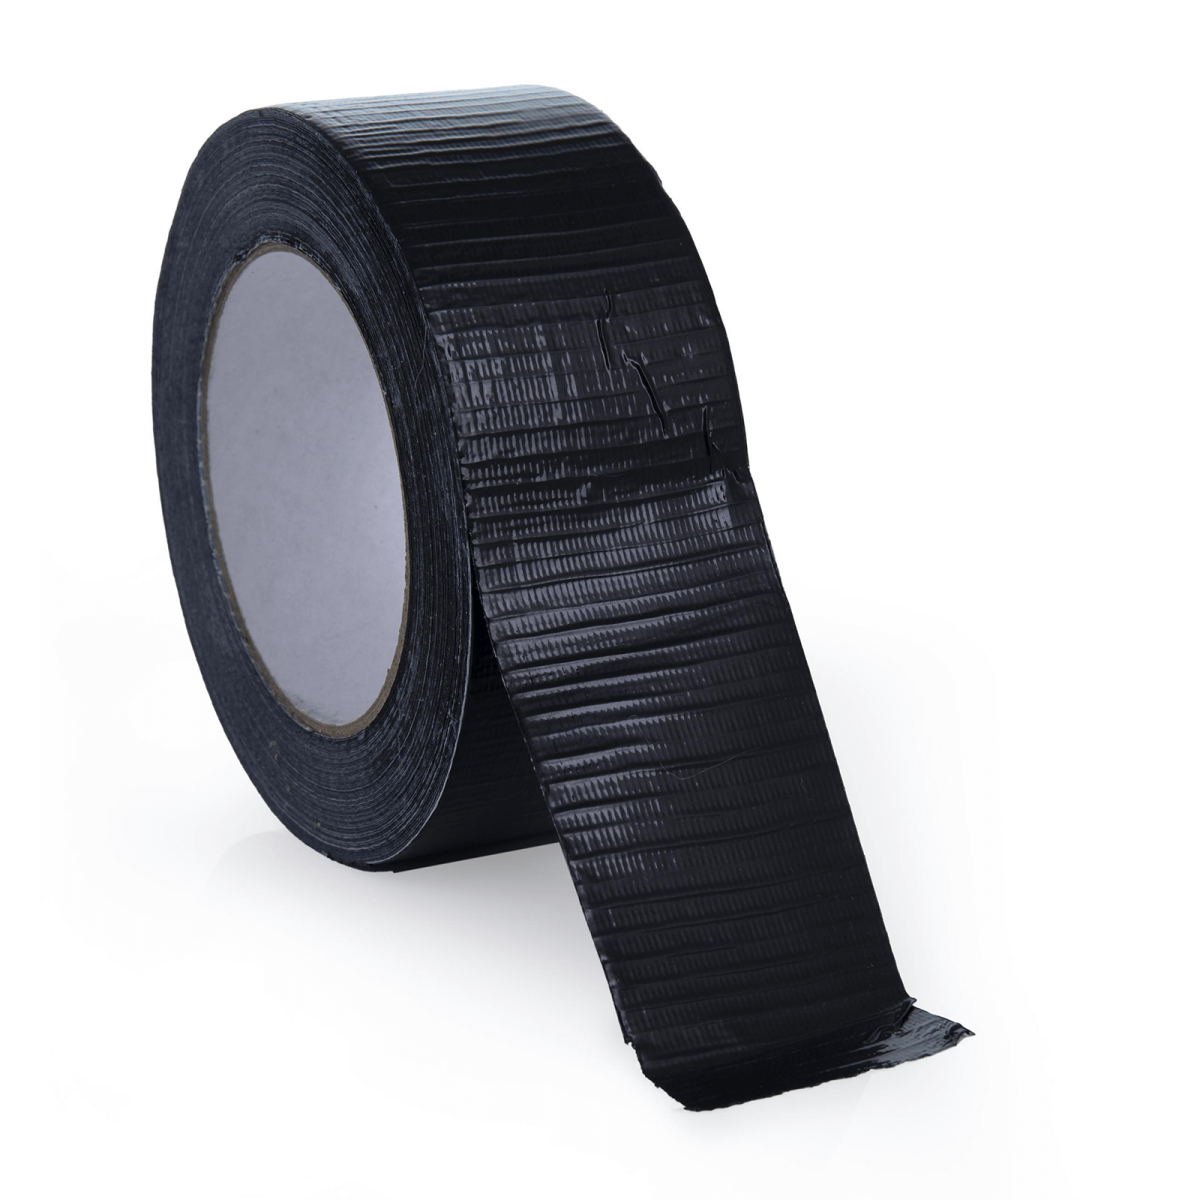 https://klinect.de/media/image/product/883/lg/panzerband-selbstklebend-duct-tape-48mm-x-50m-schwarz.png